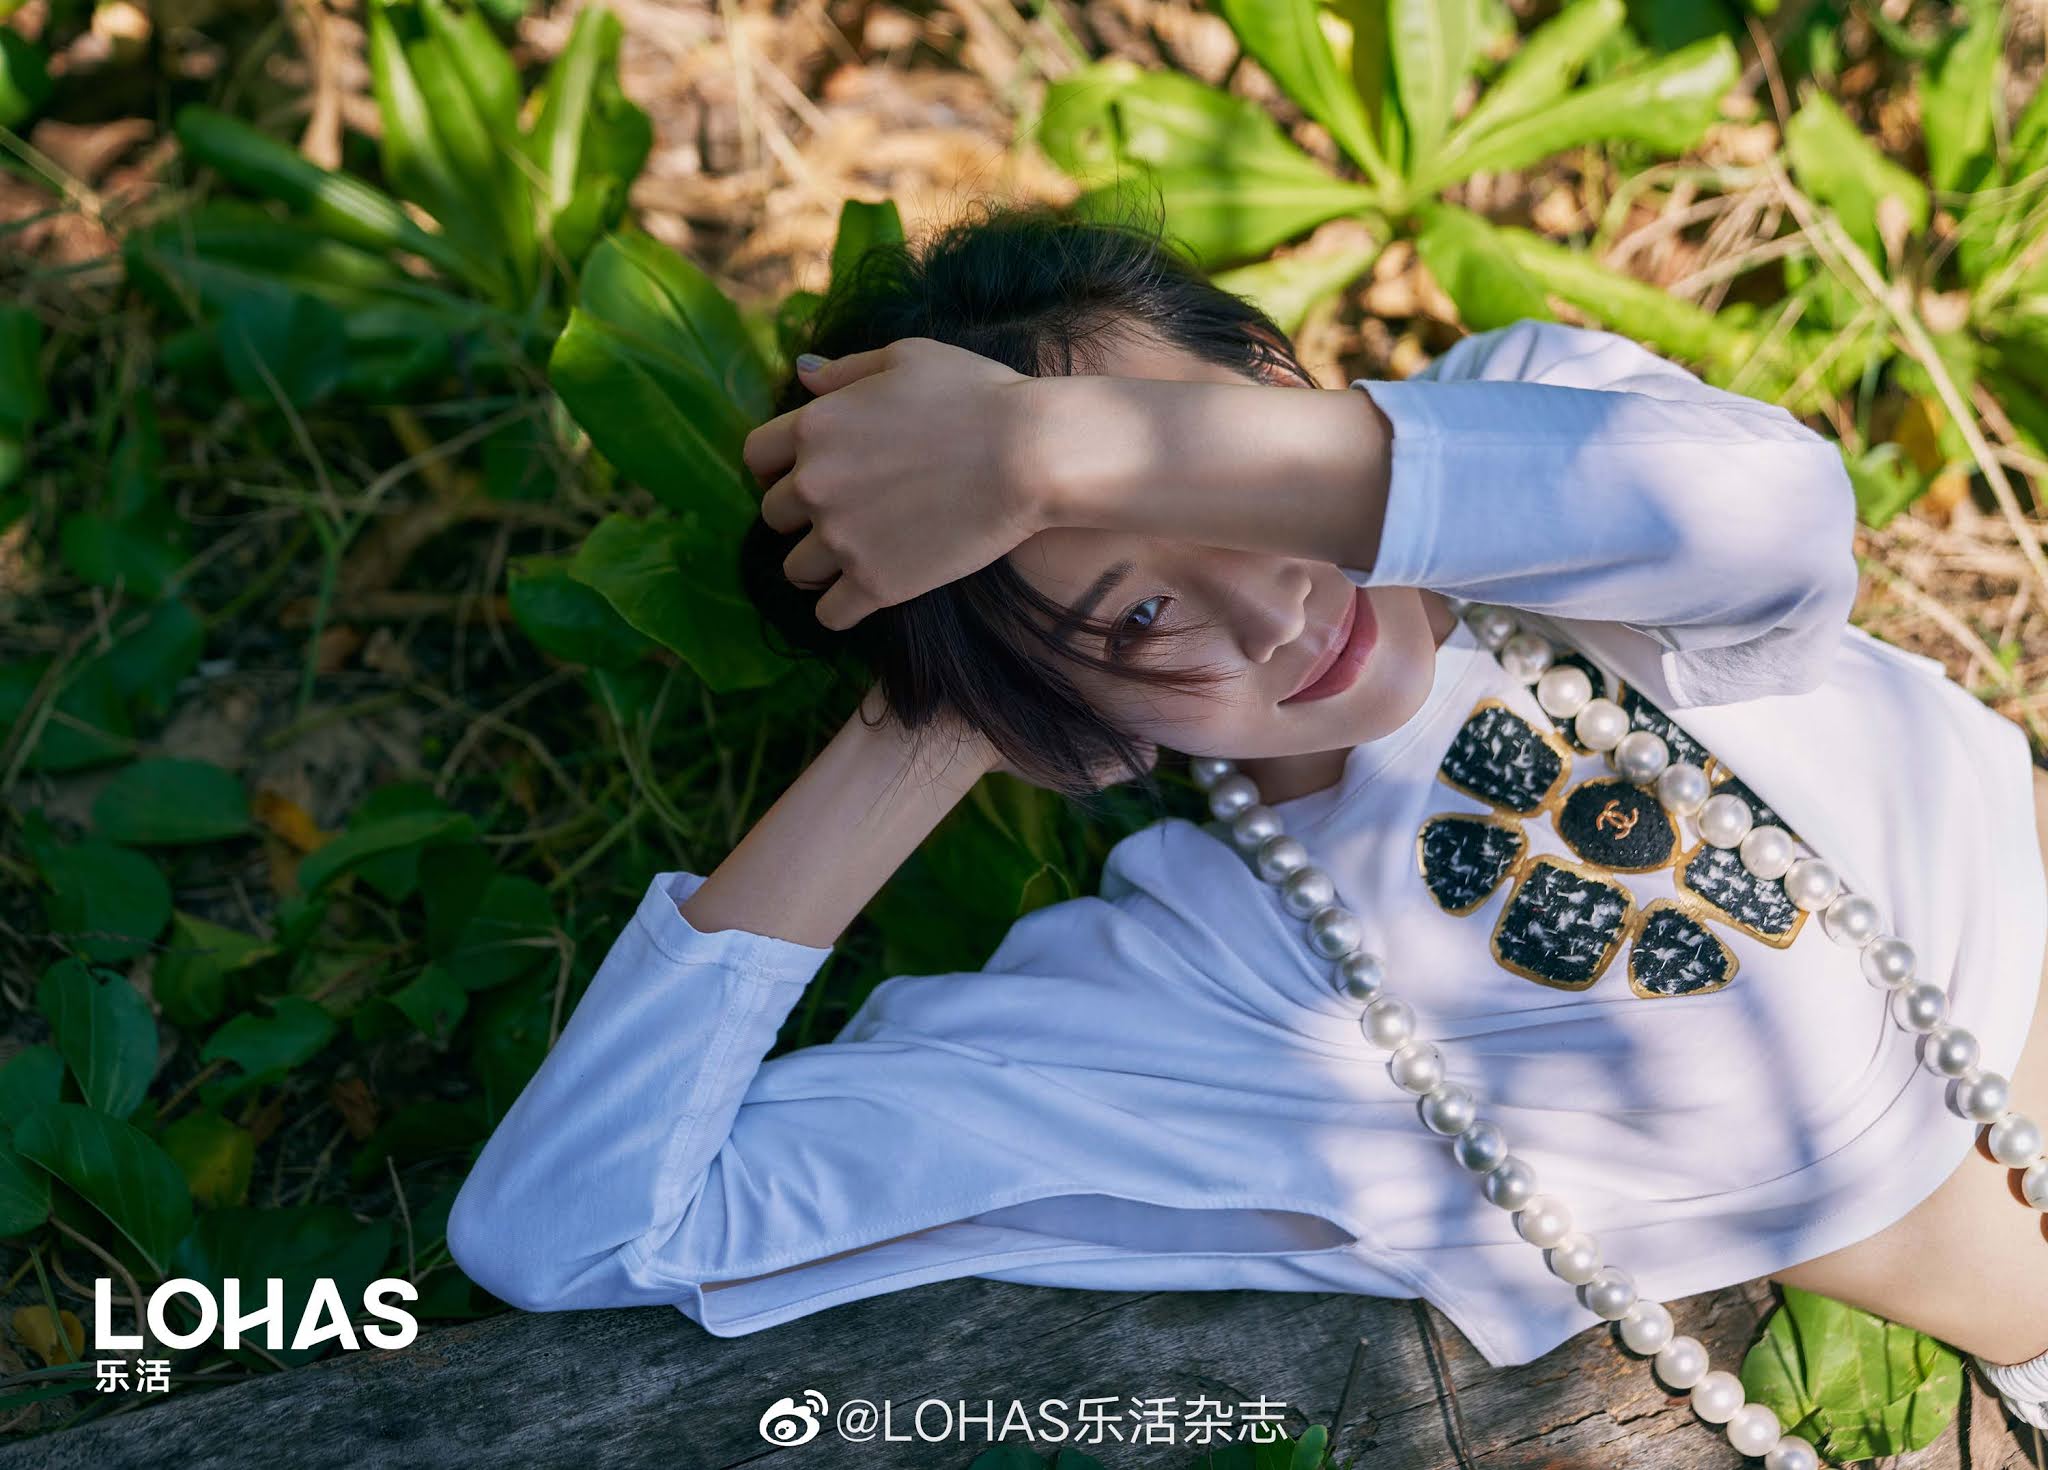 , Janine Chang poses for photo shoot